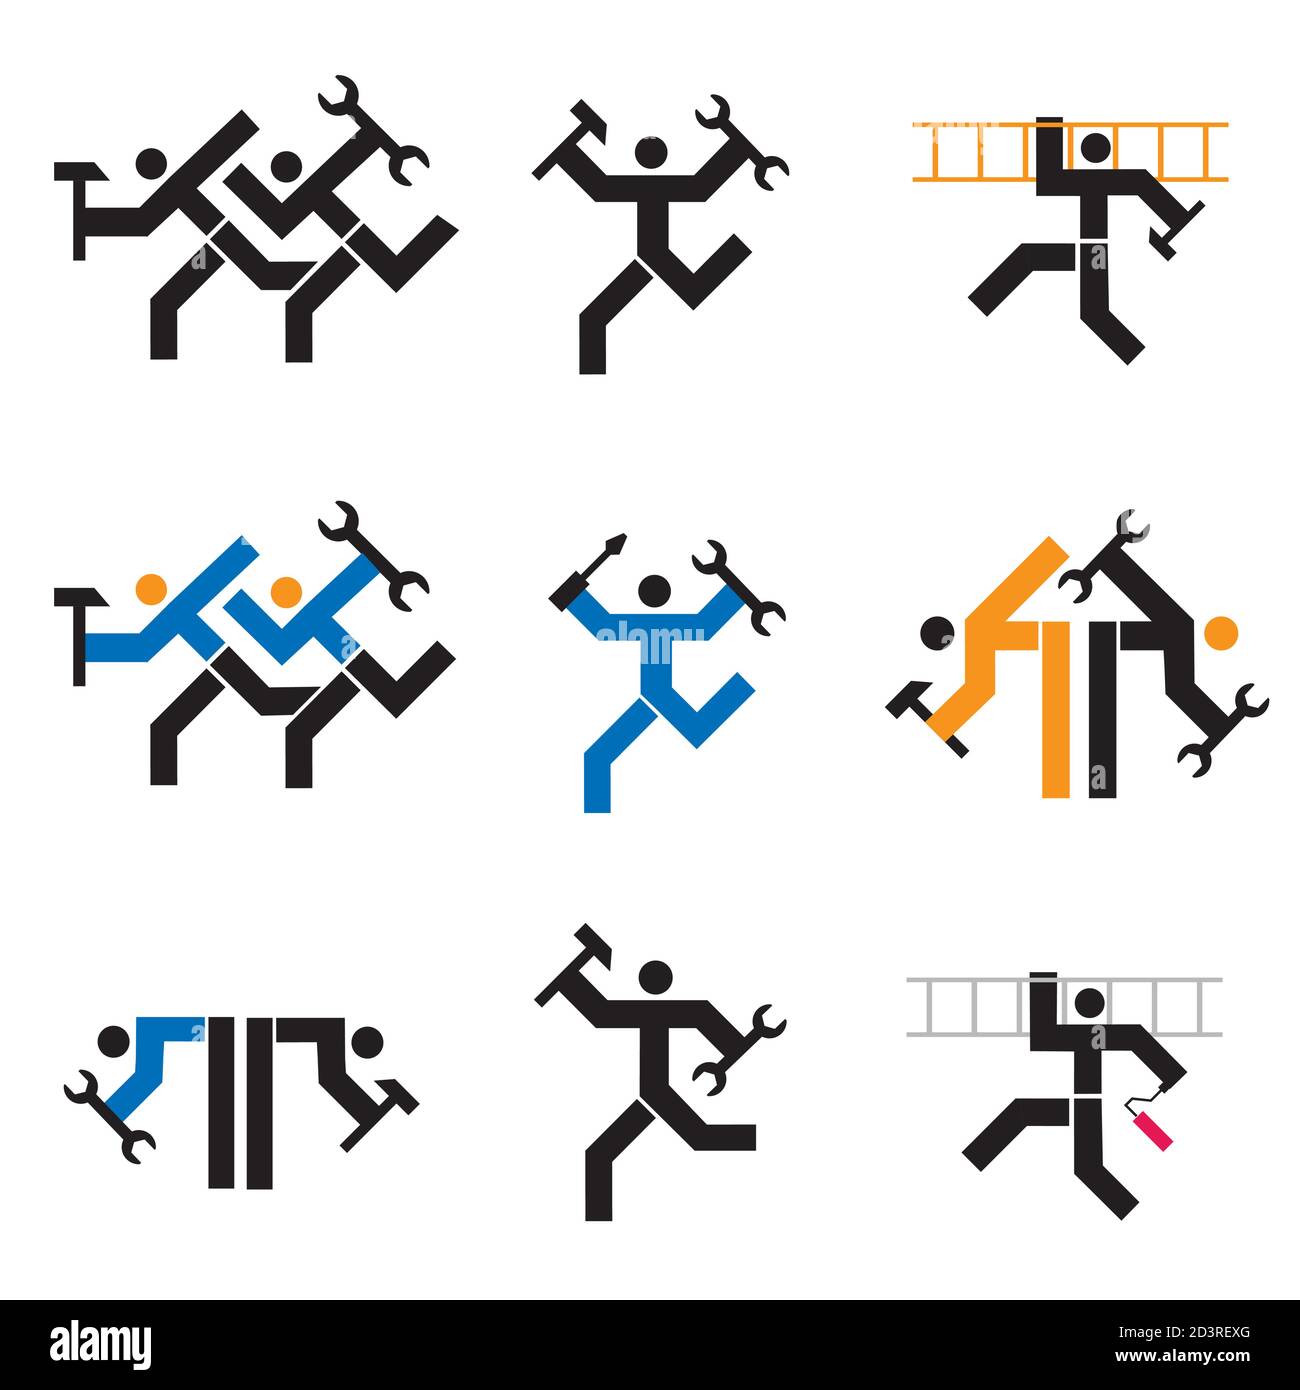 Repairman, fitter, handyman icons. Set of black an colorful symbols with workers with tools. Vector available. Stock Vector